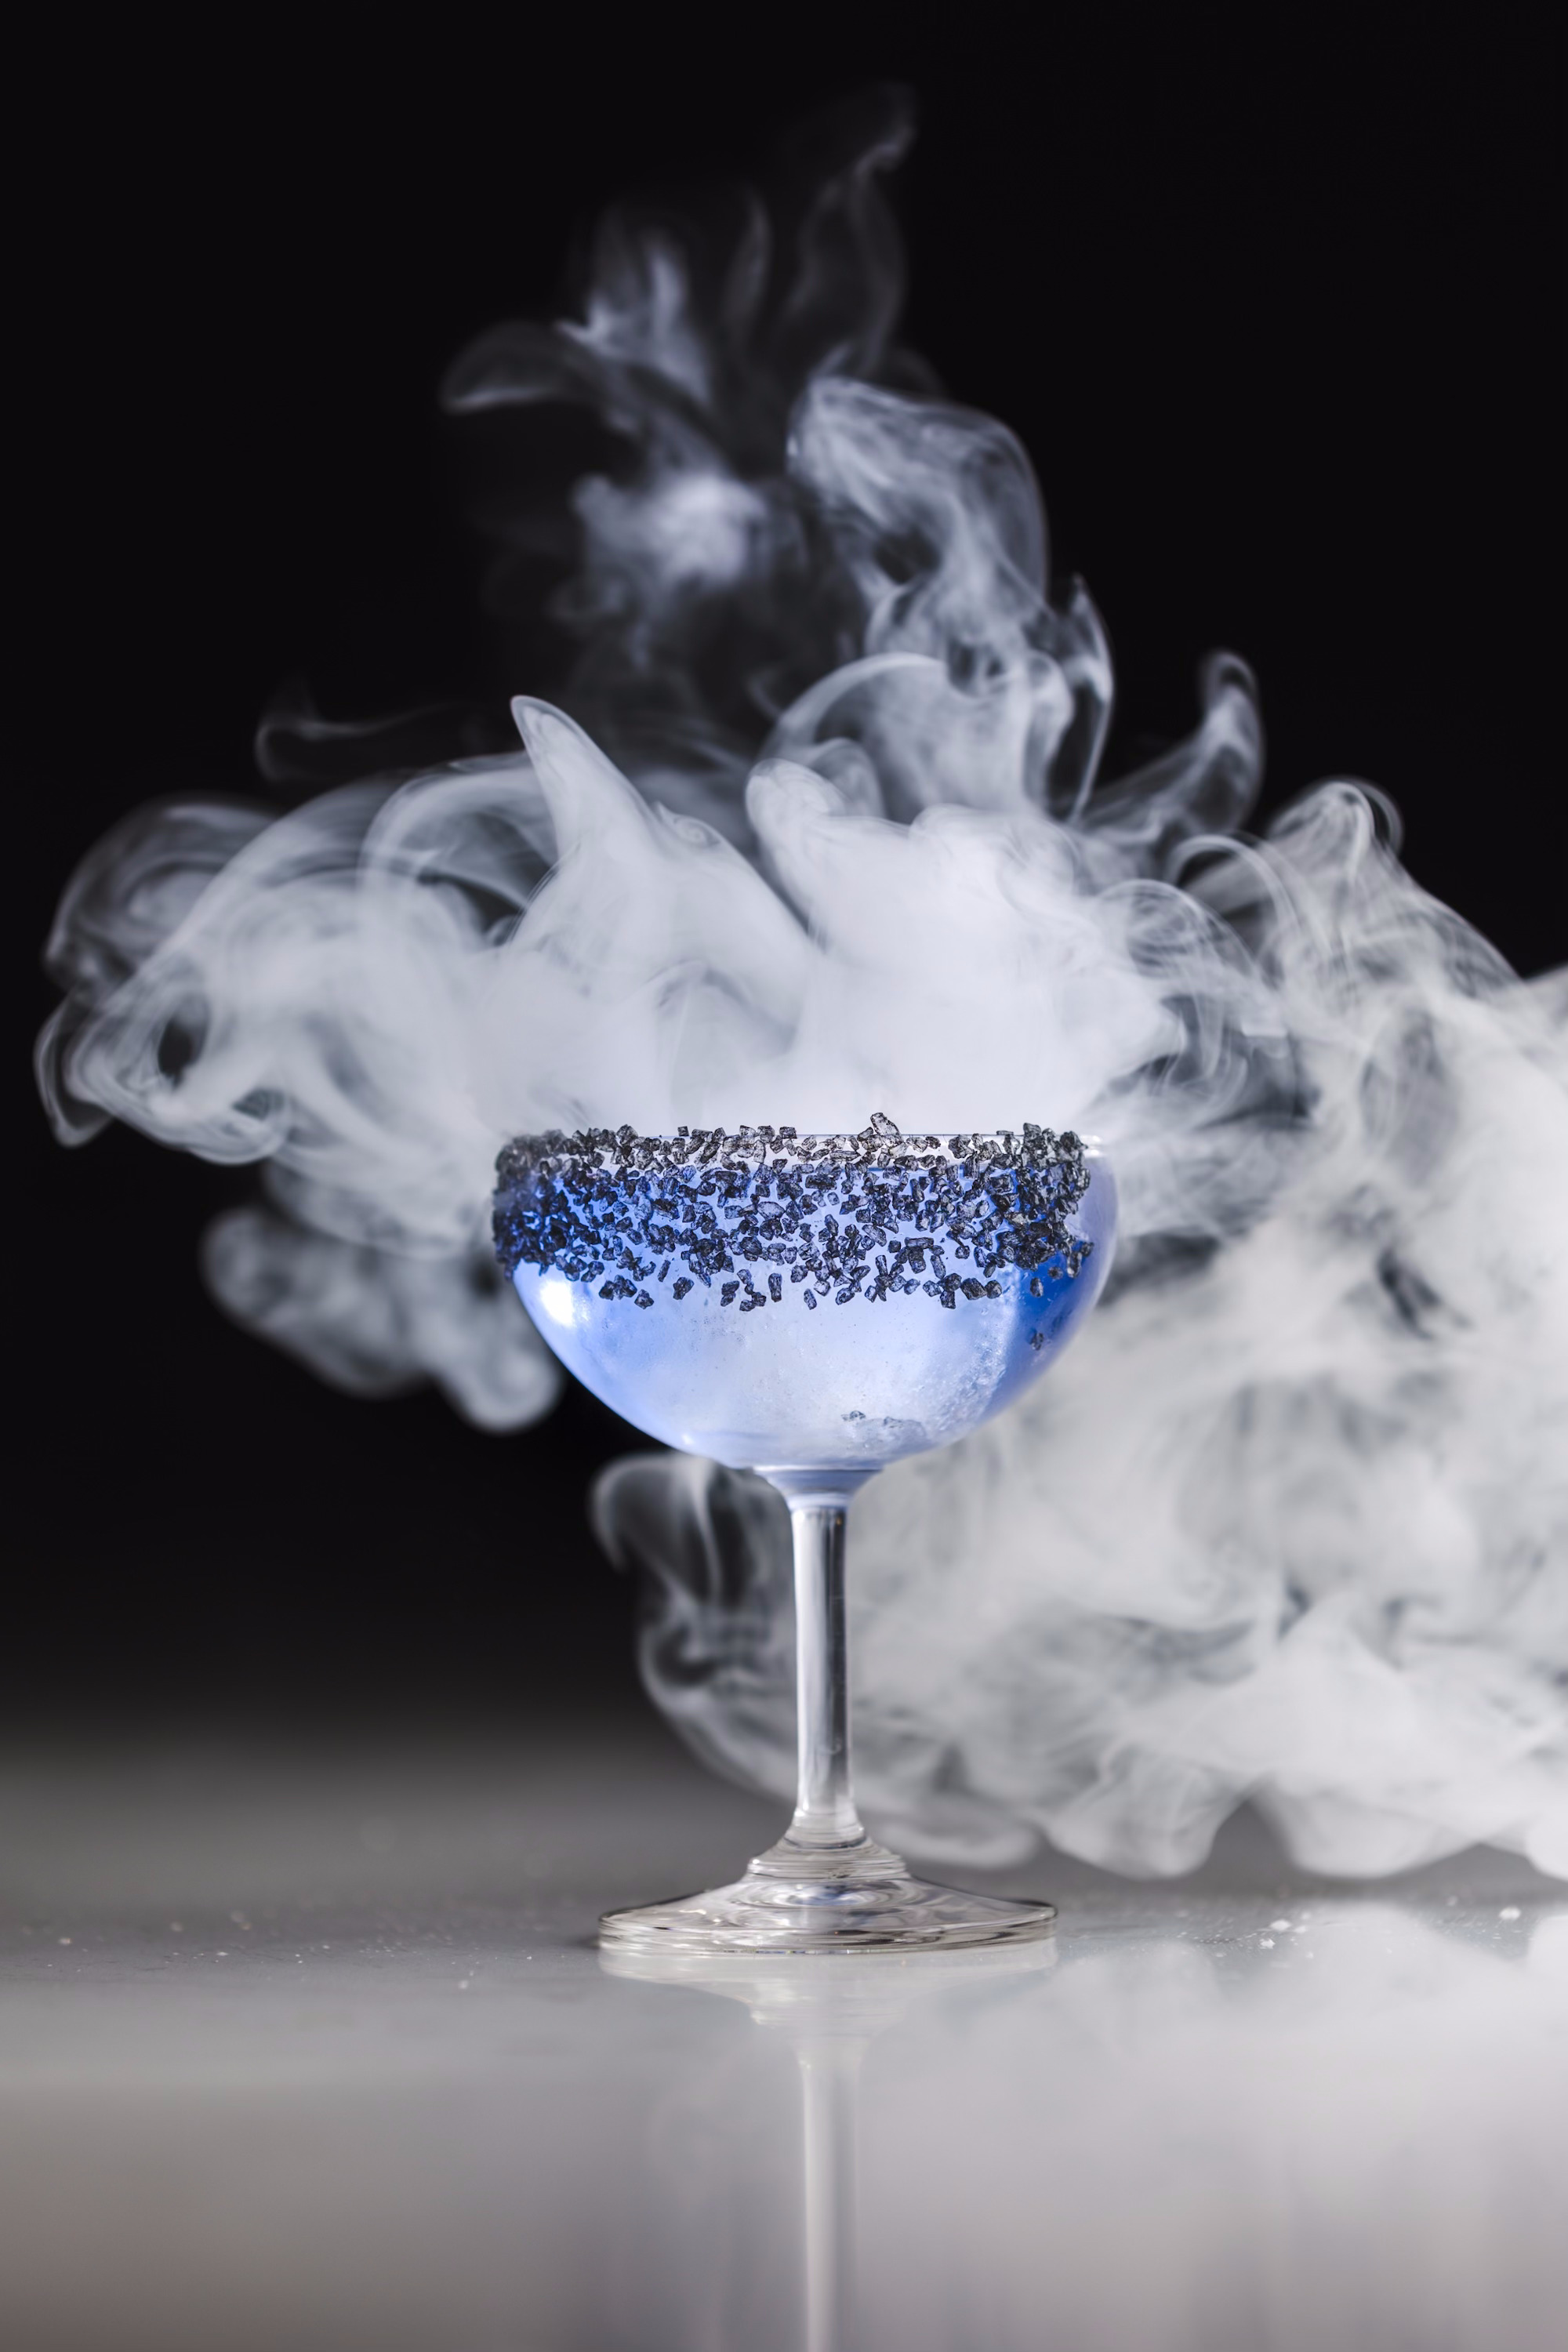 A blue-tinged cocktail with lavender around the rim and a cloud of white smoke behind it.